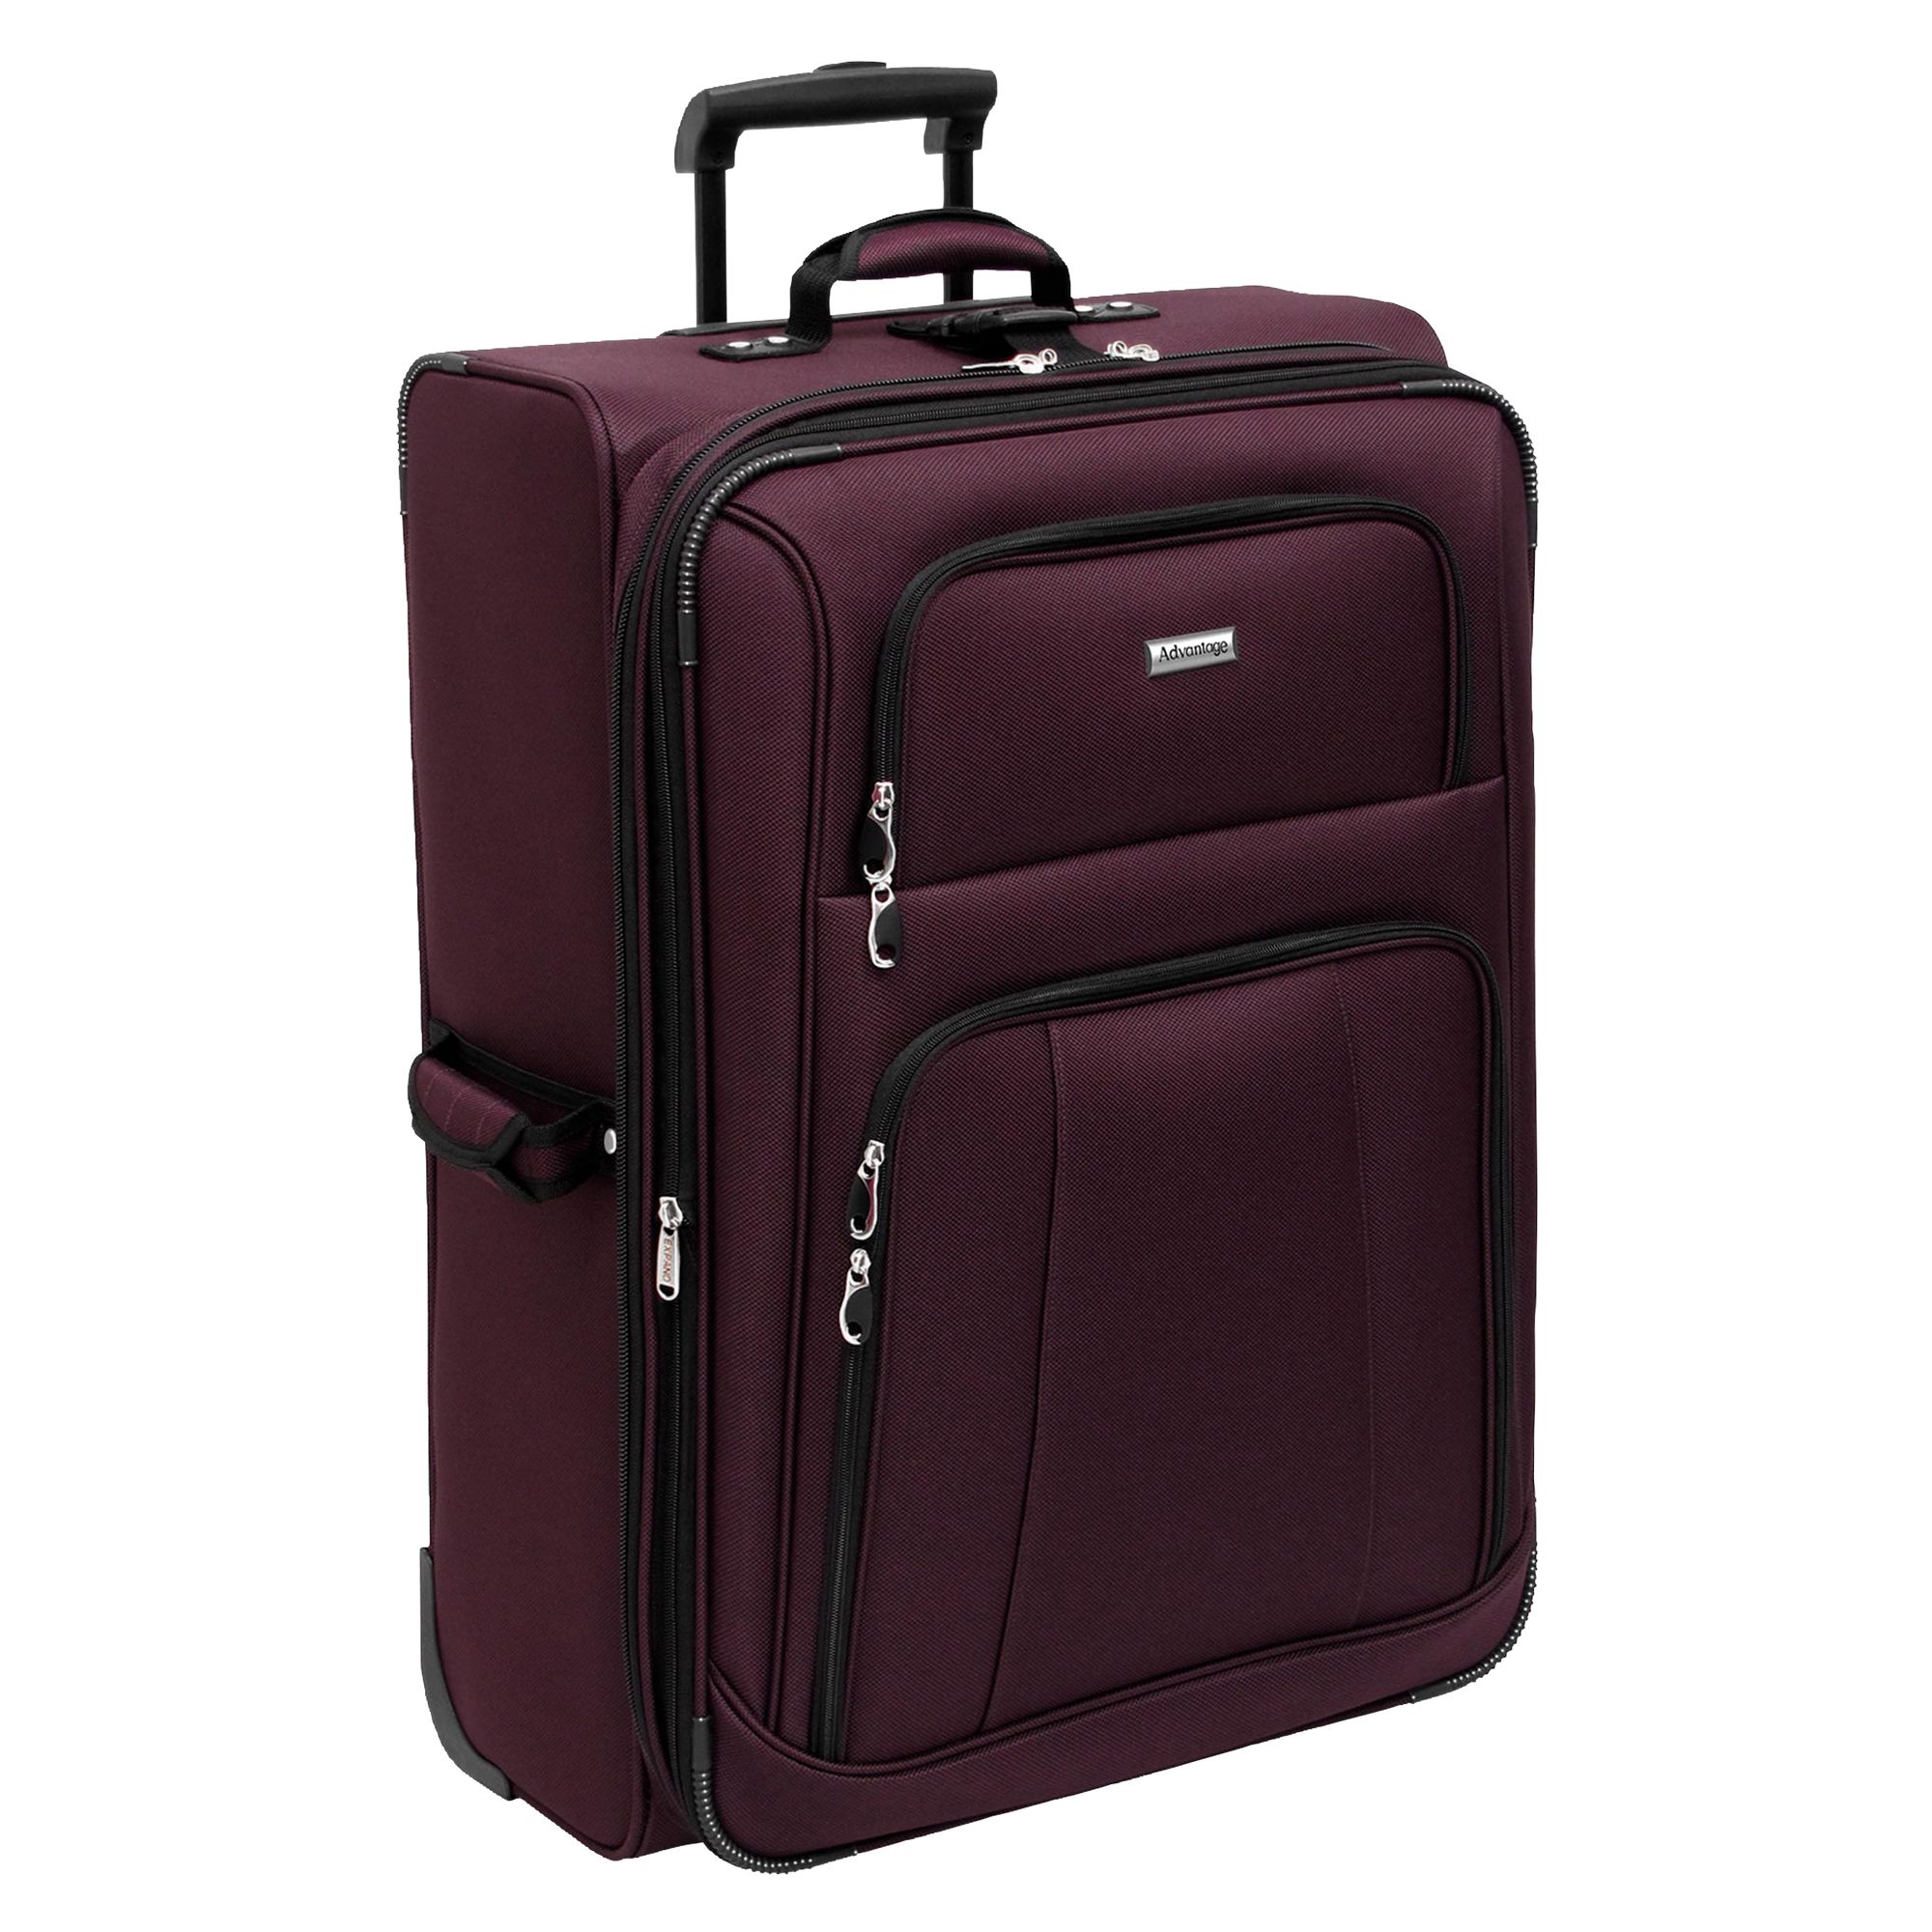 28in Lightweight Upright Merlot Suitcase: Travel in Comfort with Kmart